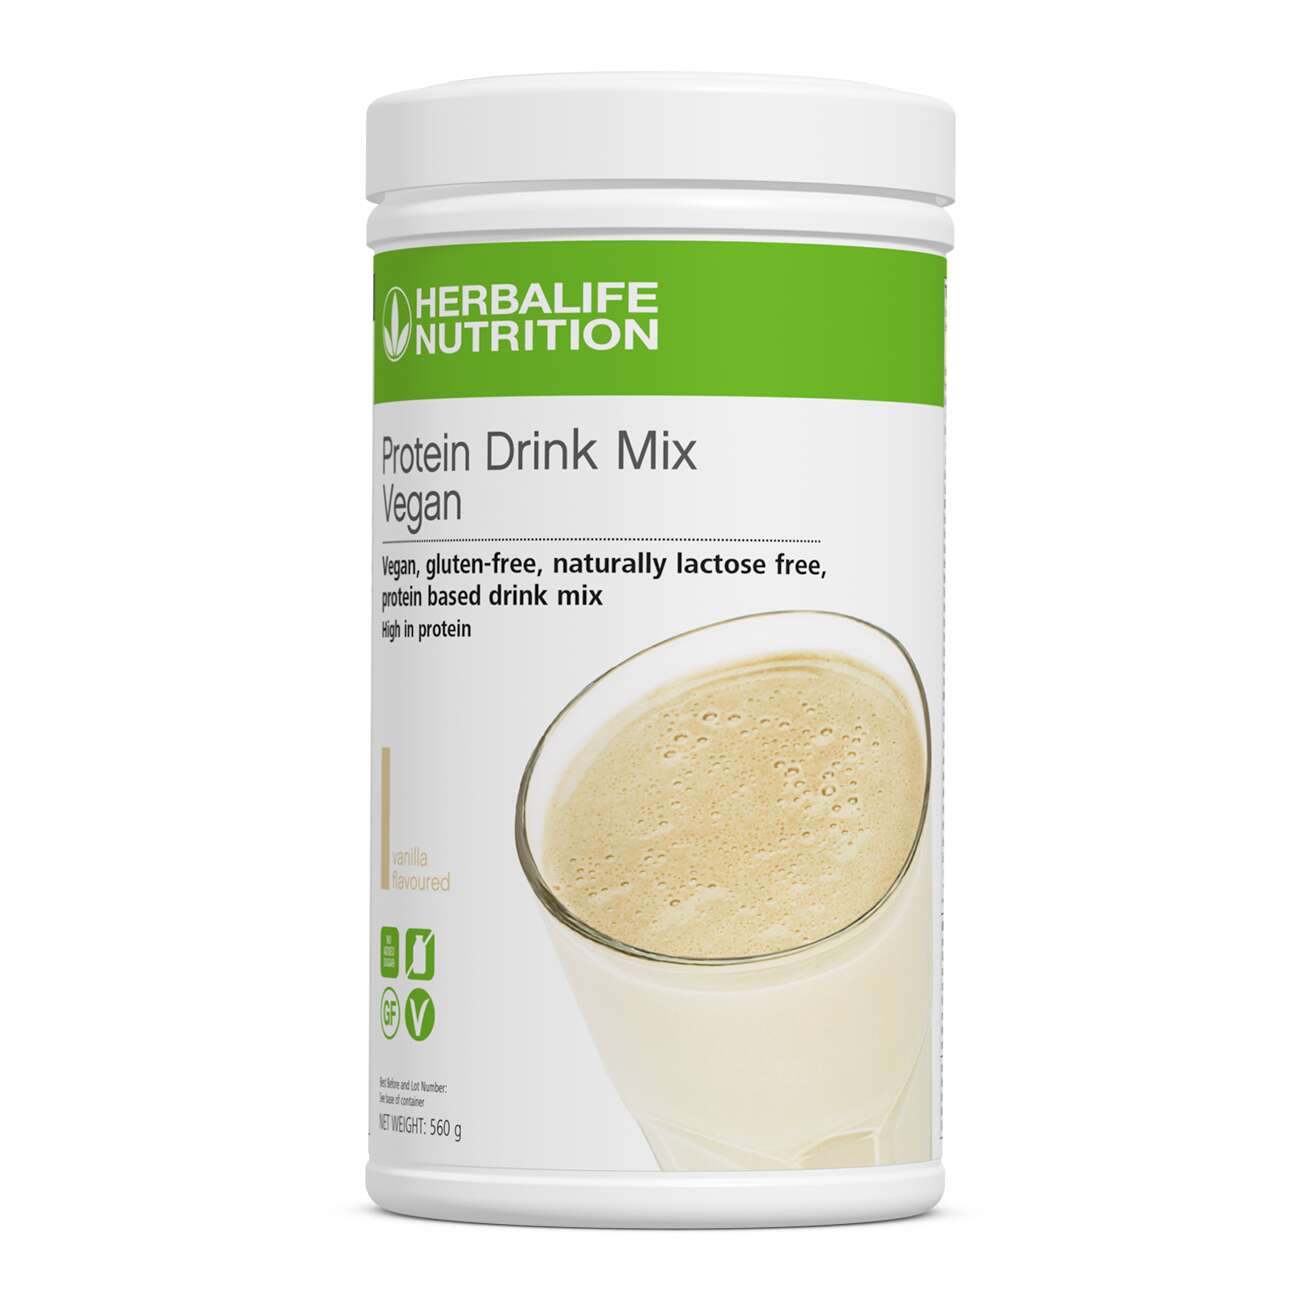 Herbalife Vegan Protein Drink Mix Canister